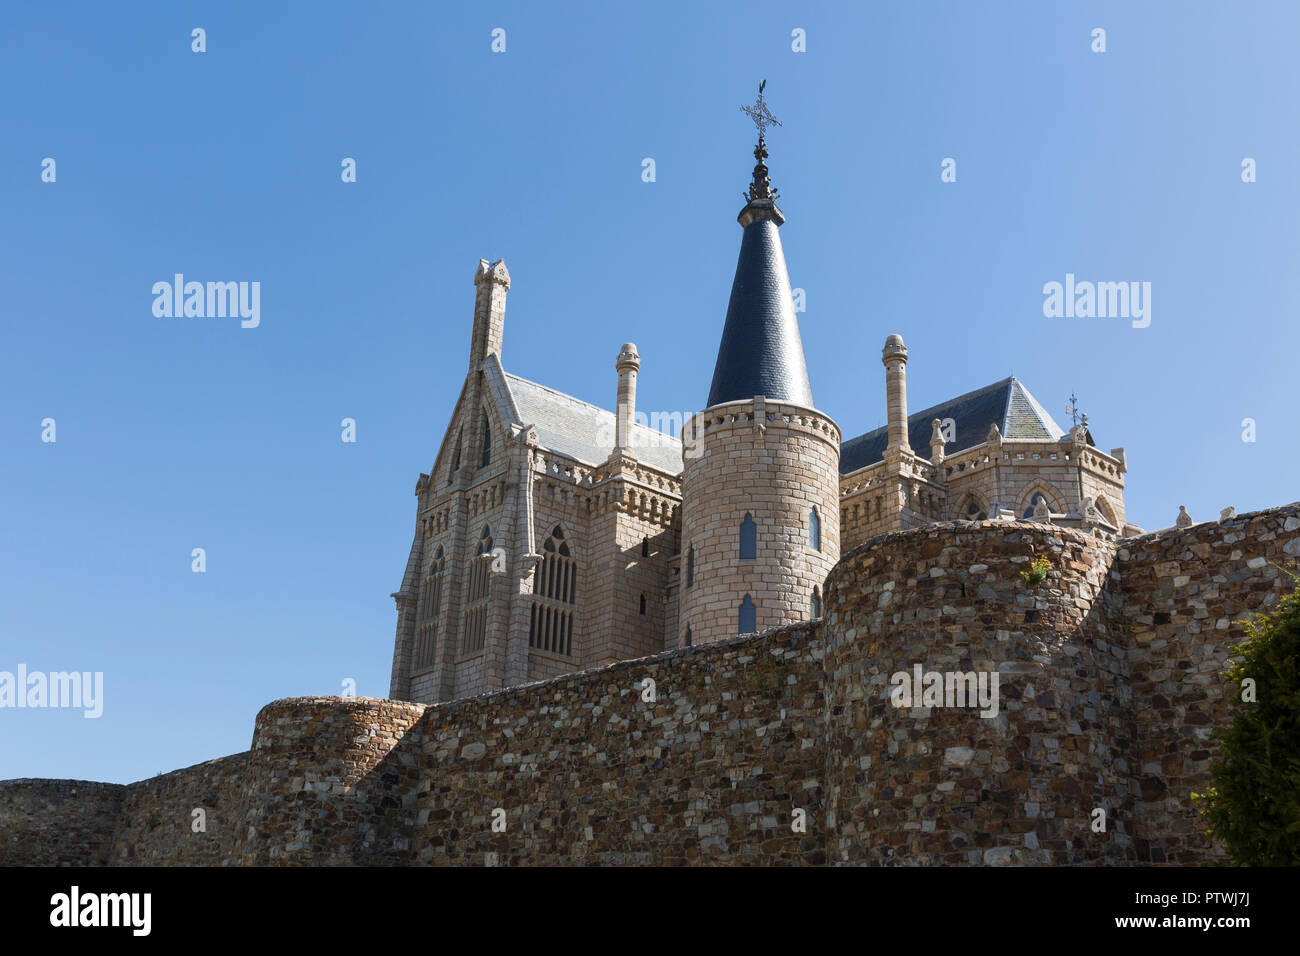 Astorga, Spain: View of the Roman Wall and Episcopal Palace of Astorga drom Parque Del Melgar. Built by Catalan architect Antoni Gaudí between 1889 an Stock Photo